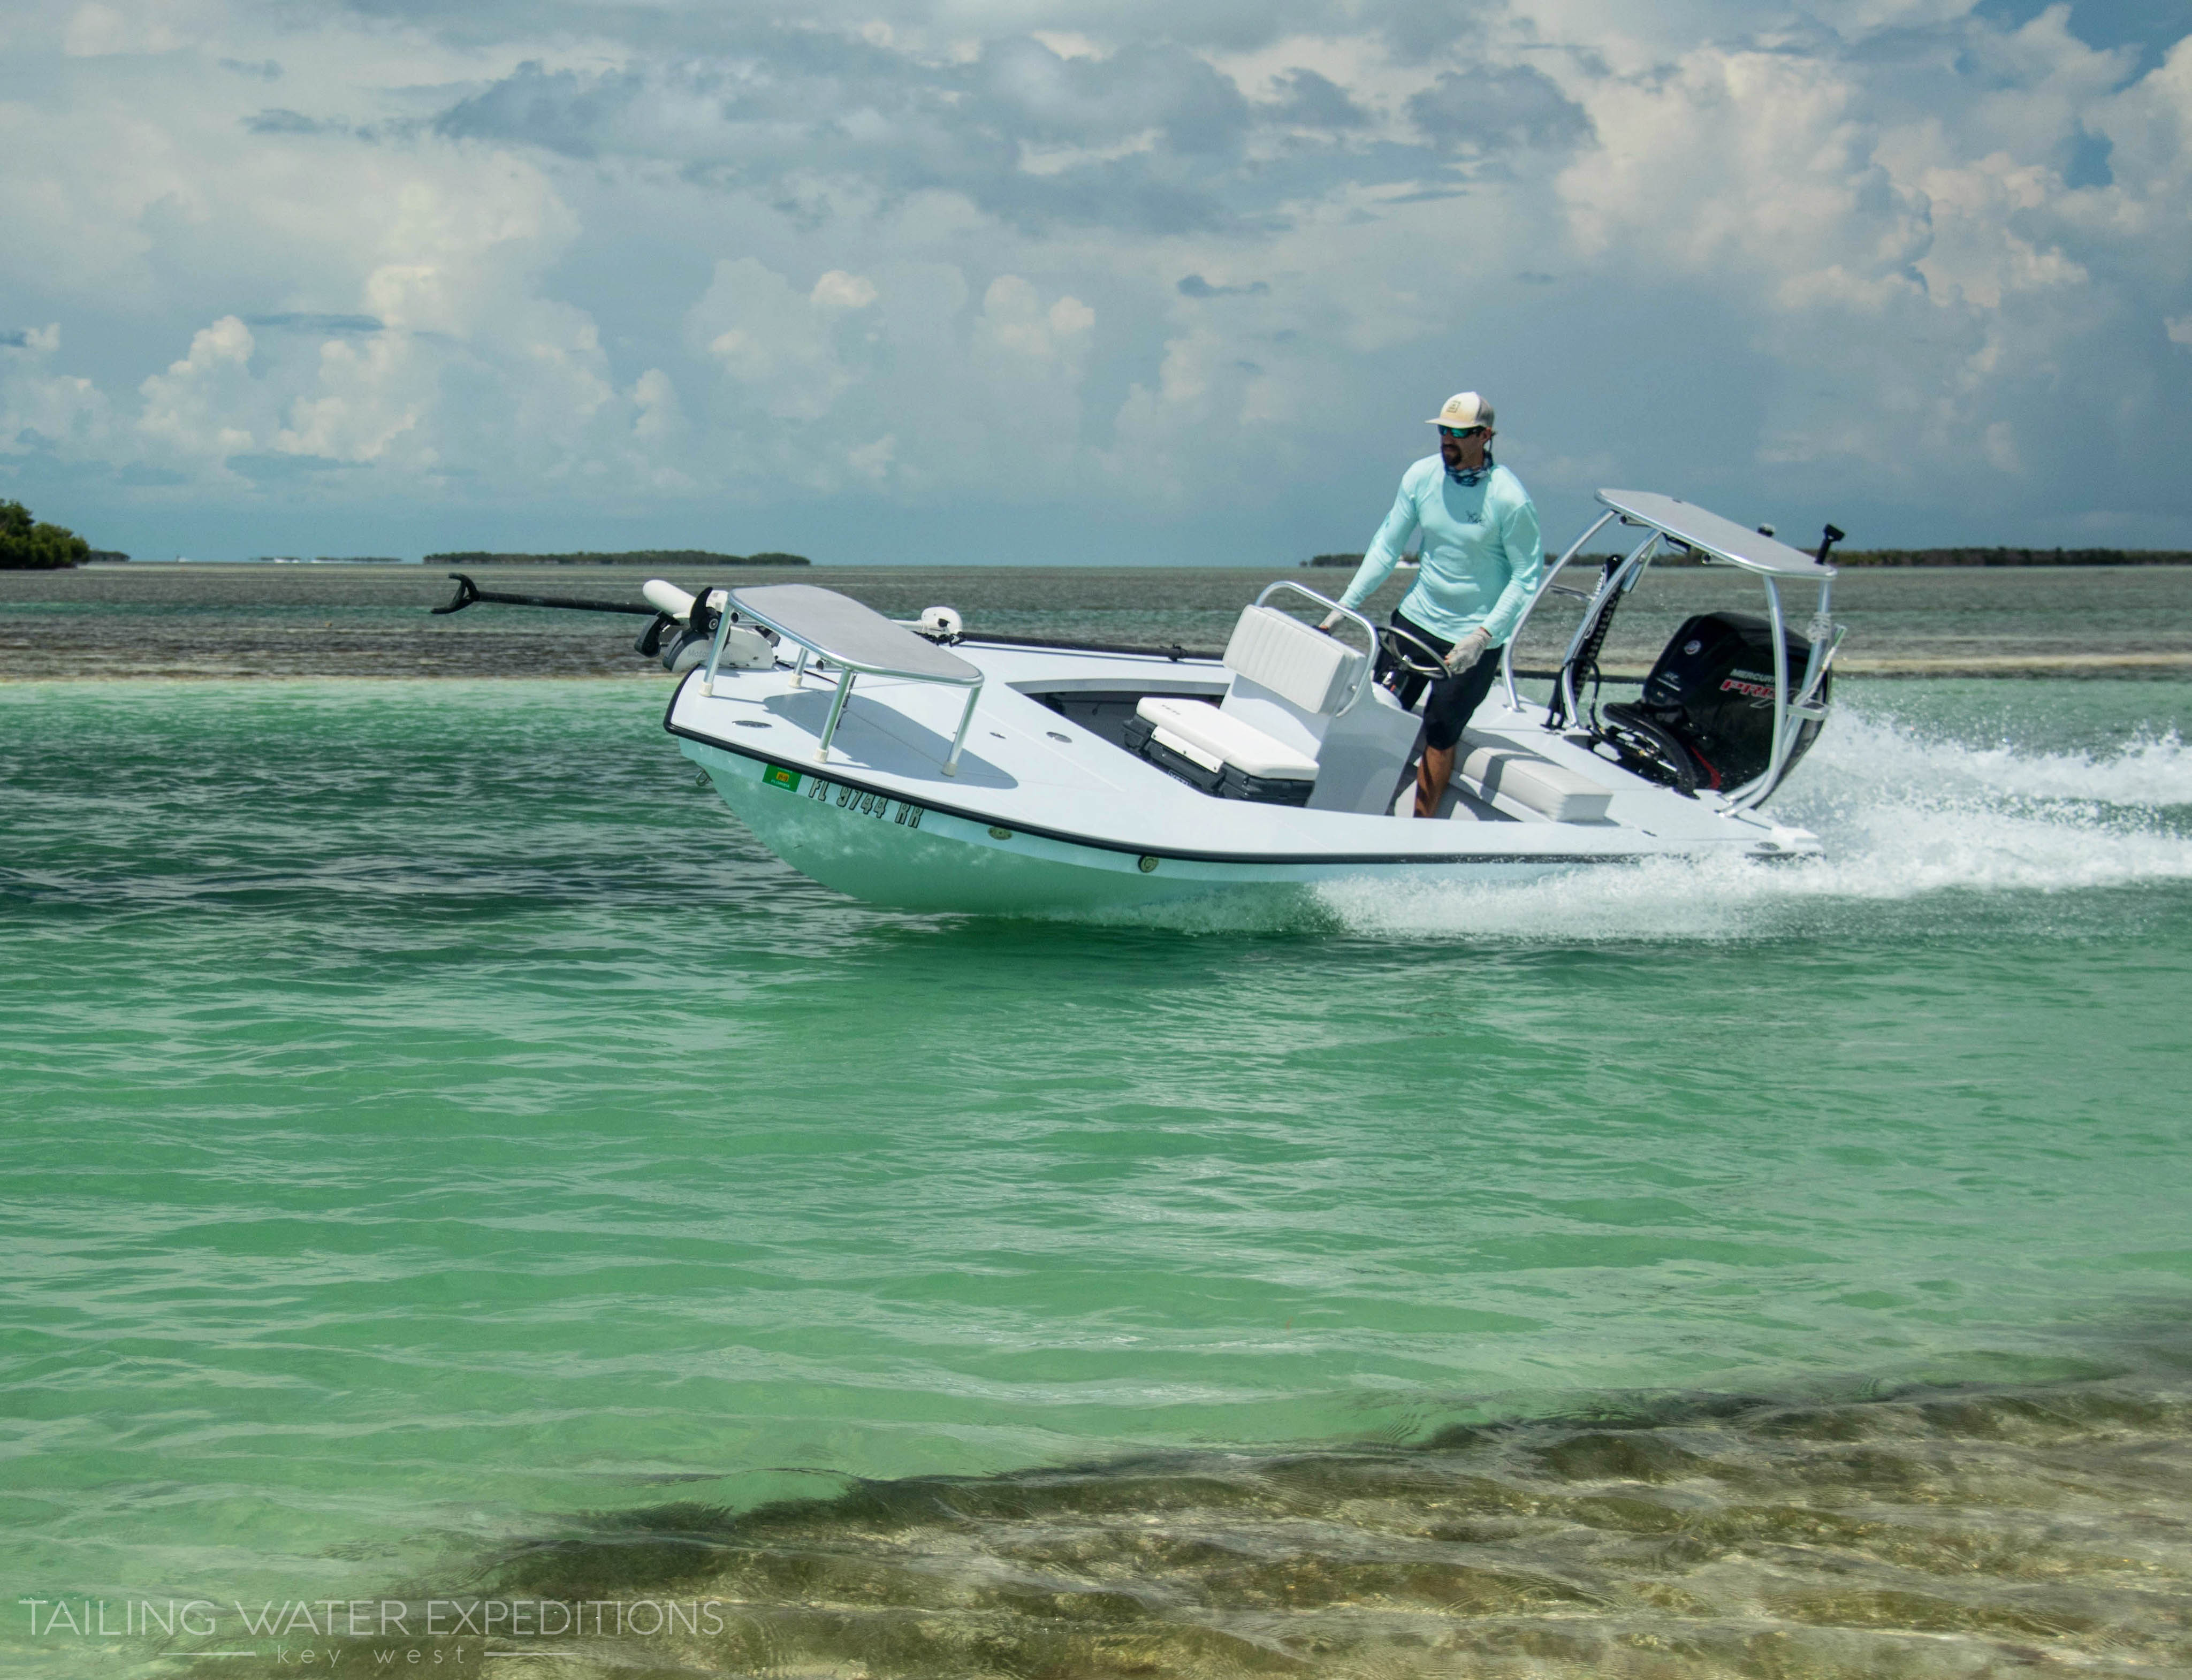 Capt. Nick LaBadie driving his new East Cape Evo to a new fishing spot in Key West, Florida